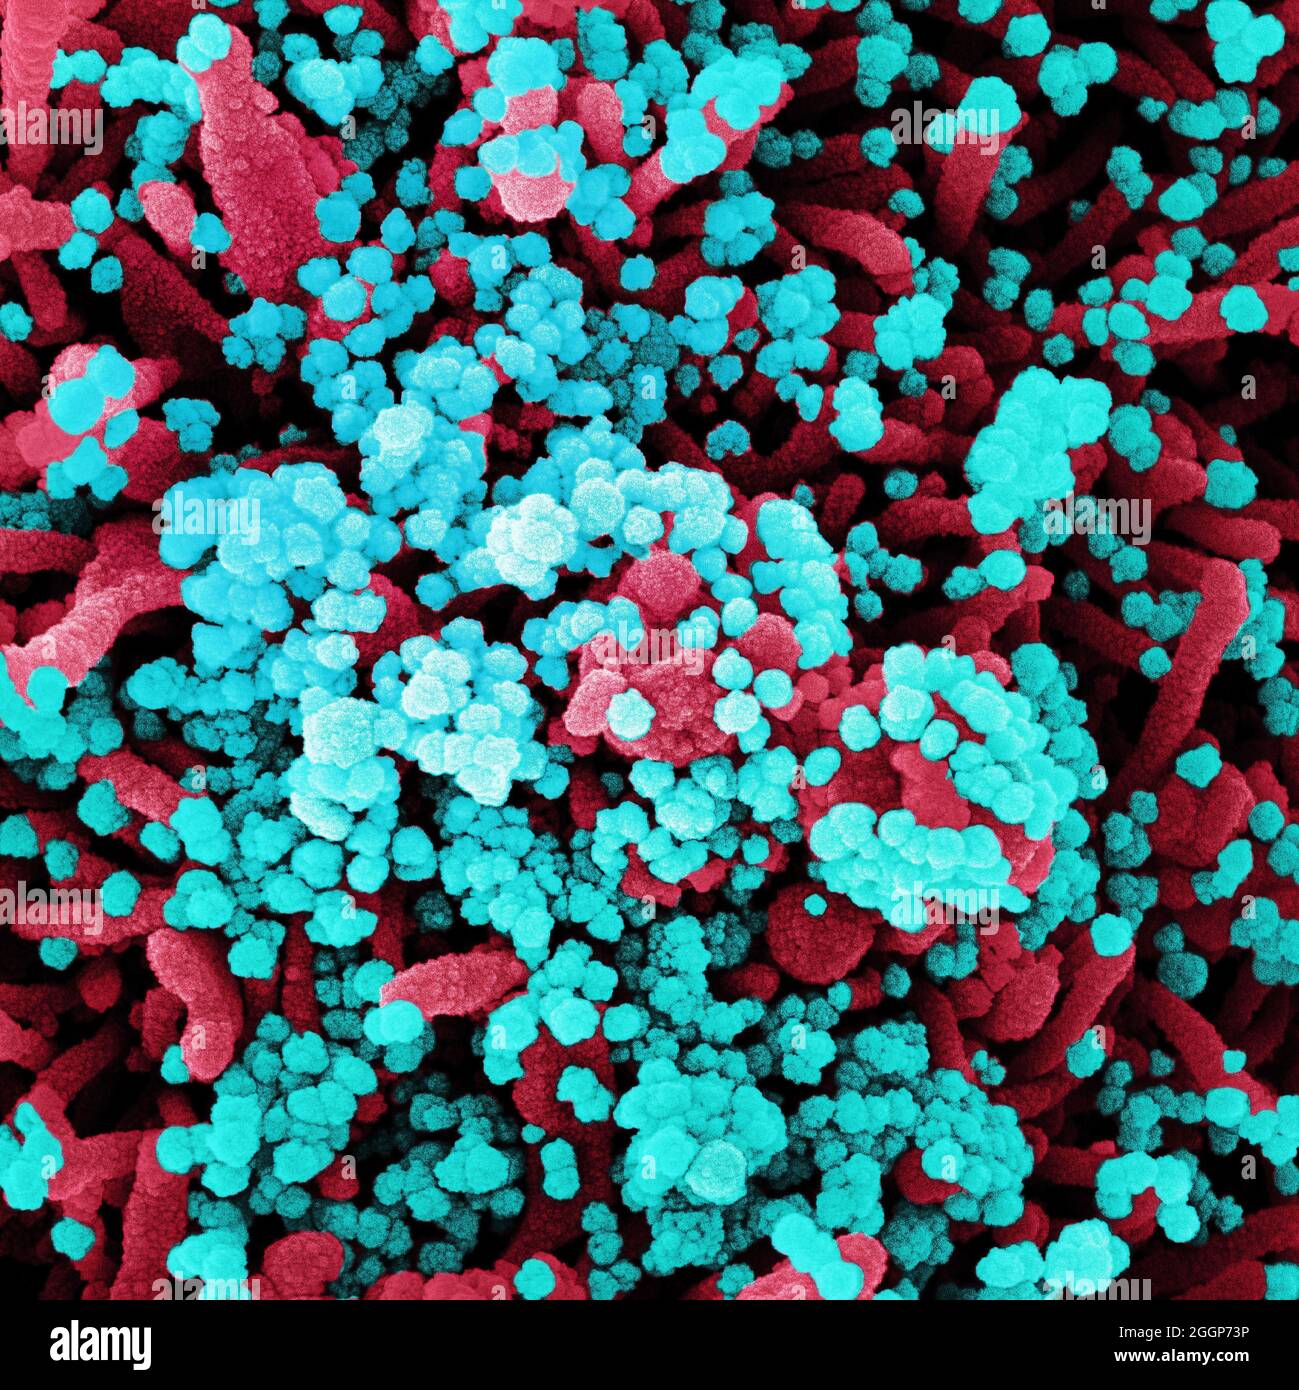 Scanning electron micrograph of a cell heavily infected with SARS-CoV-2 virus particles (blue), isolated from a patient sample. Stock Photo